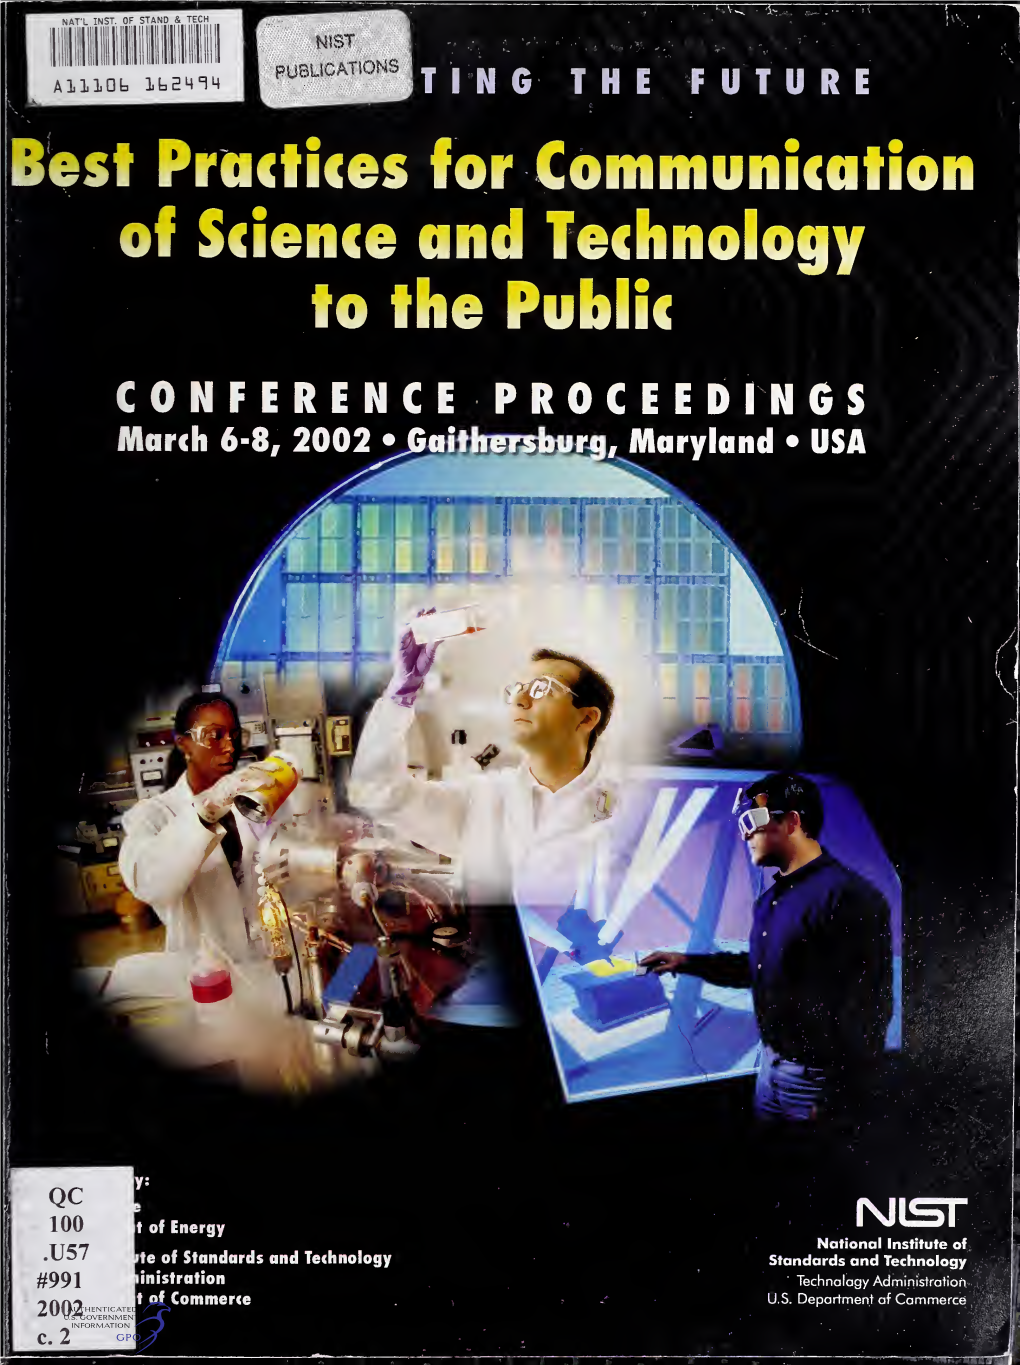 Communicating the Future: Best Practices for Communication of Science and Technology to the Public